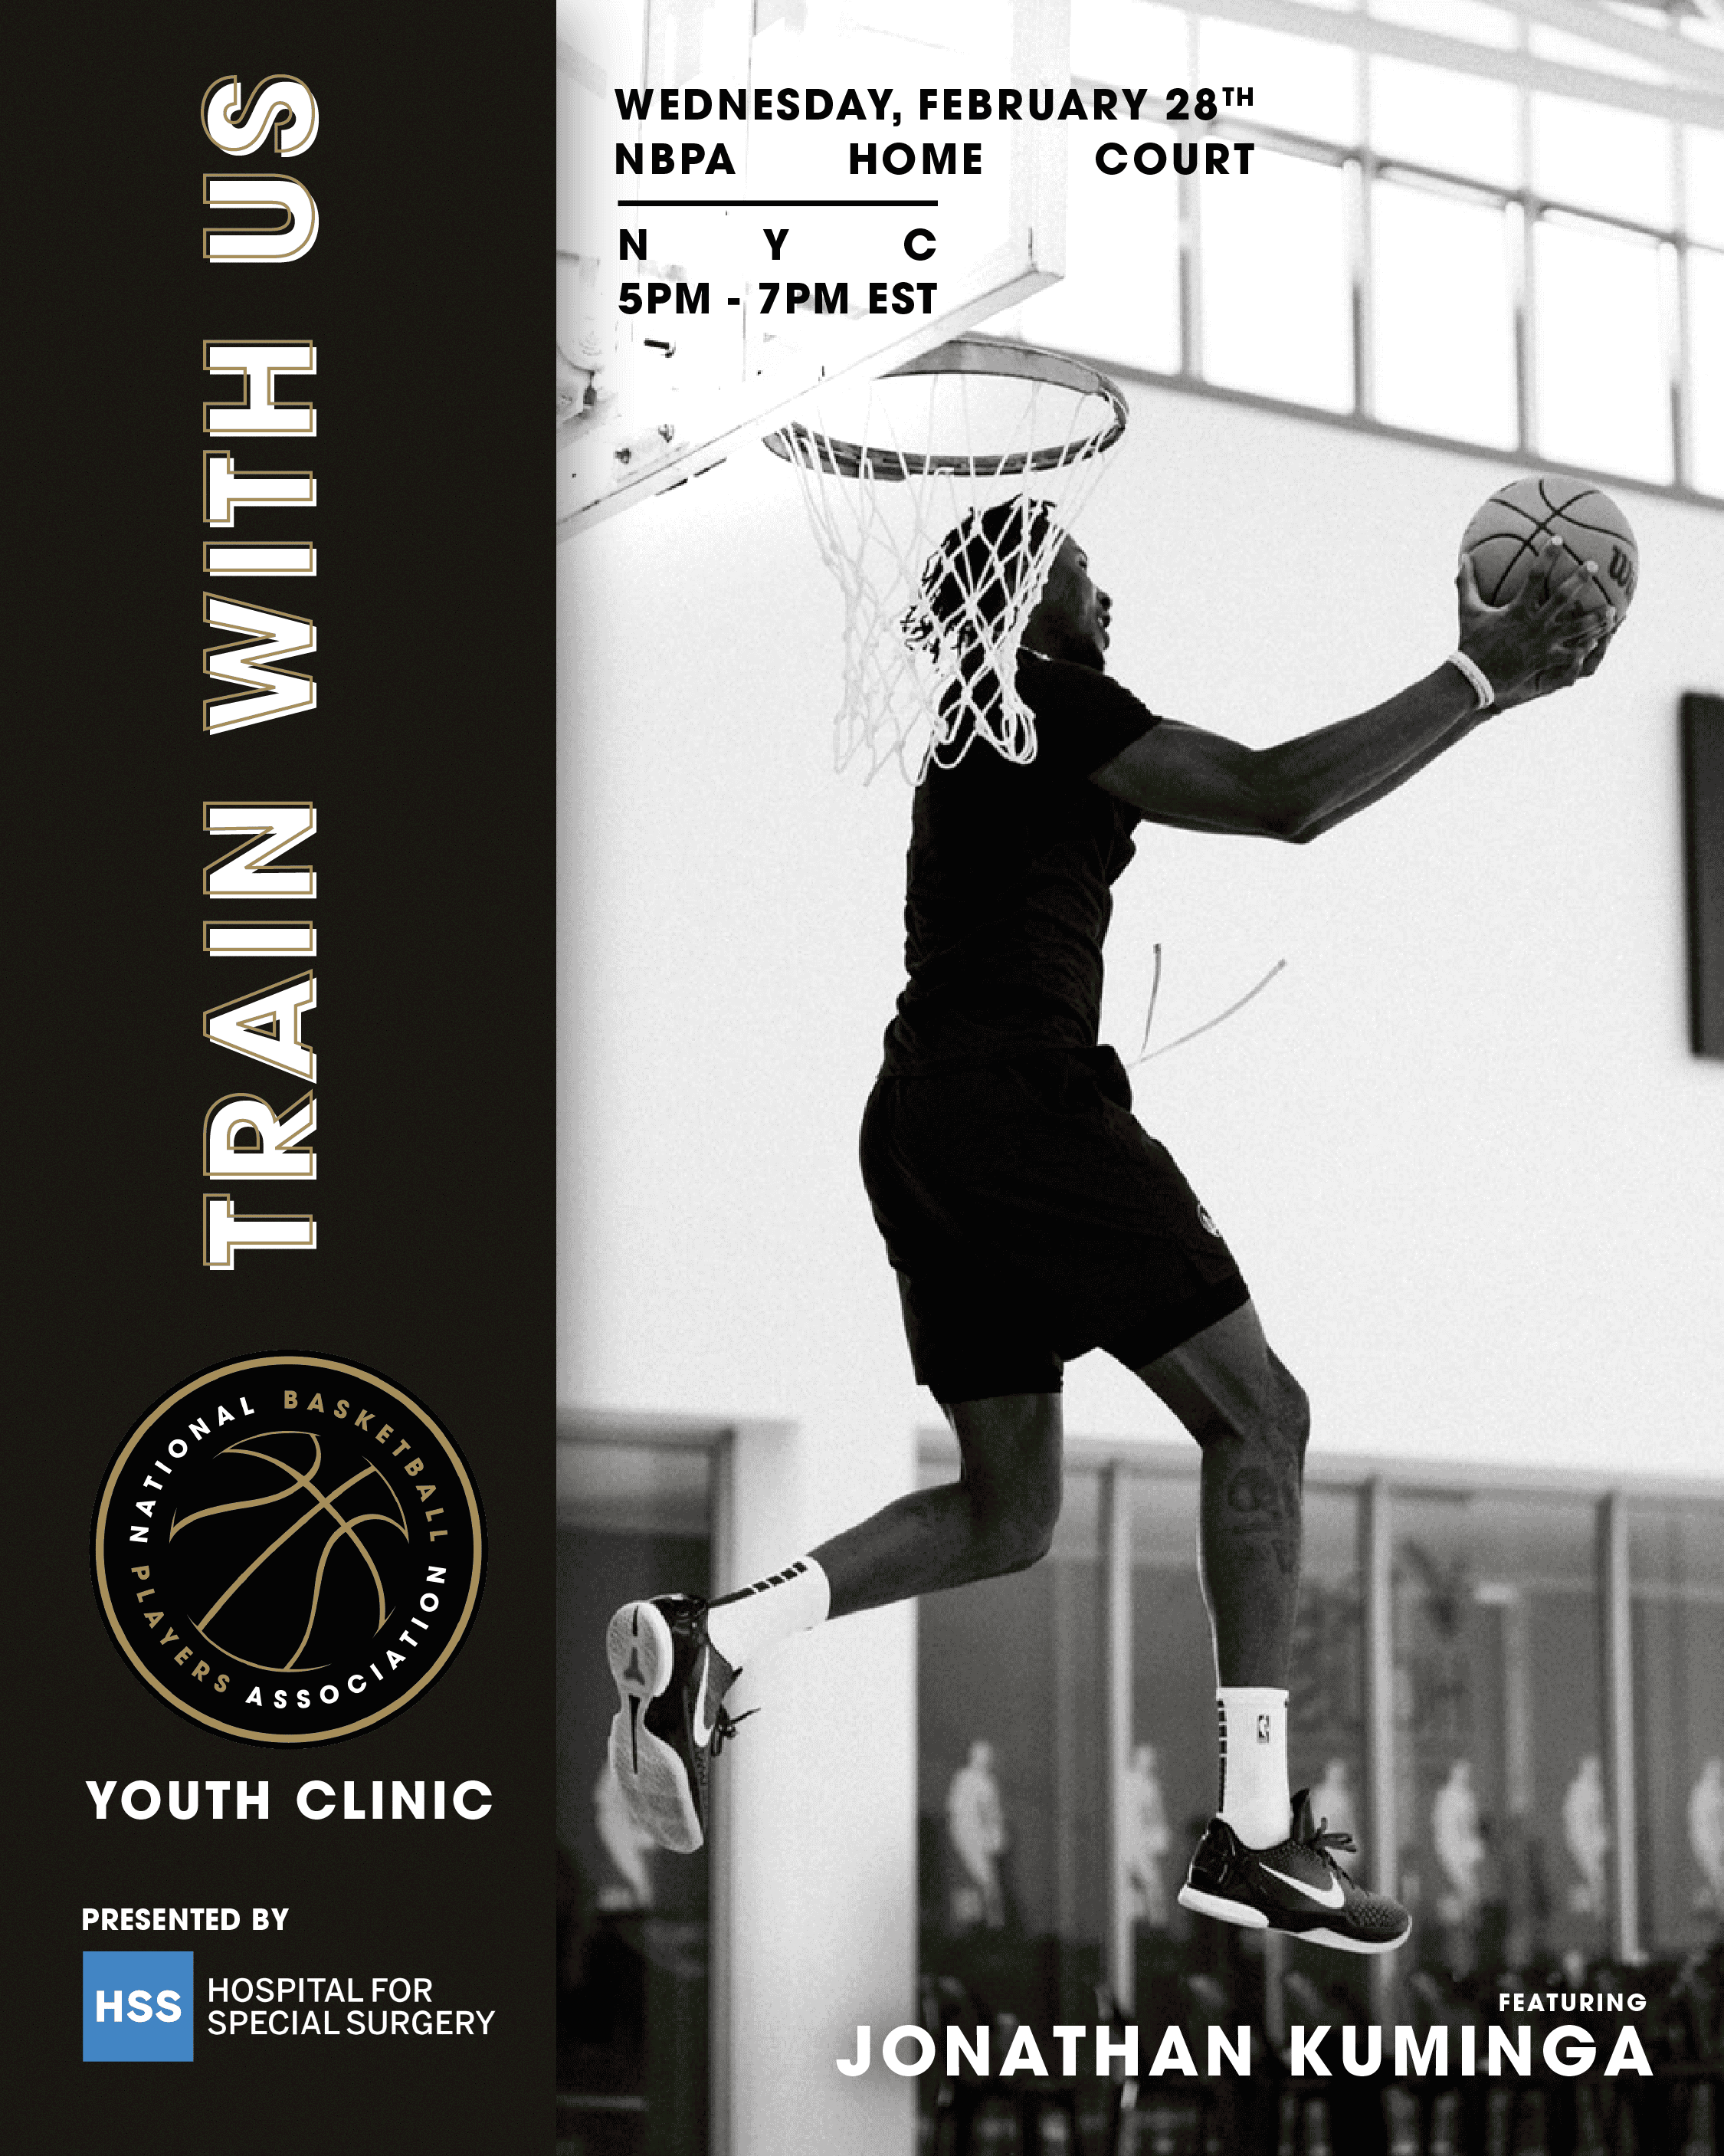  NBPA Clinic & Coat Drive with Myles Turner poster